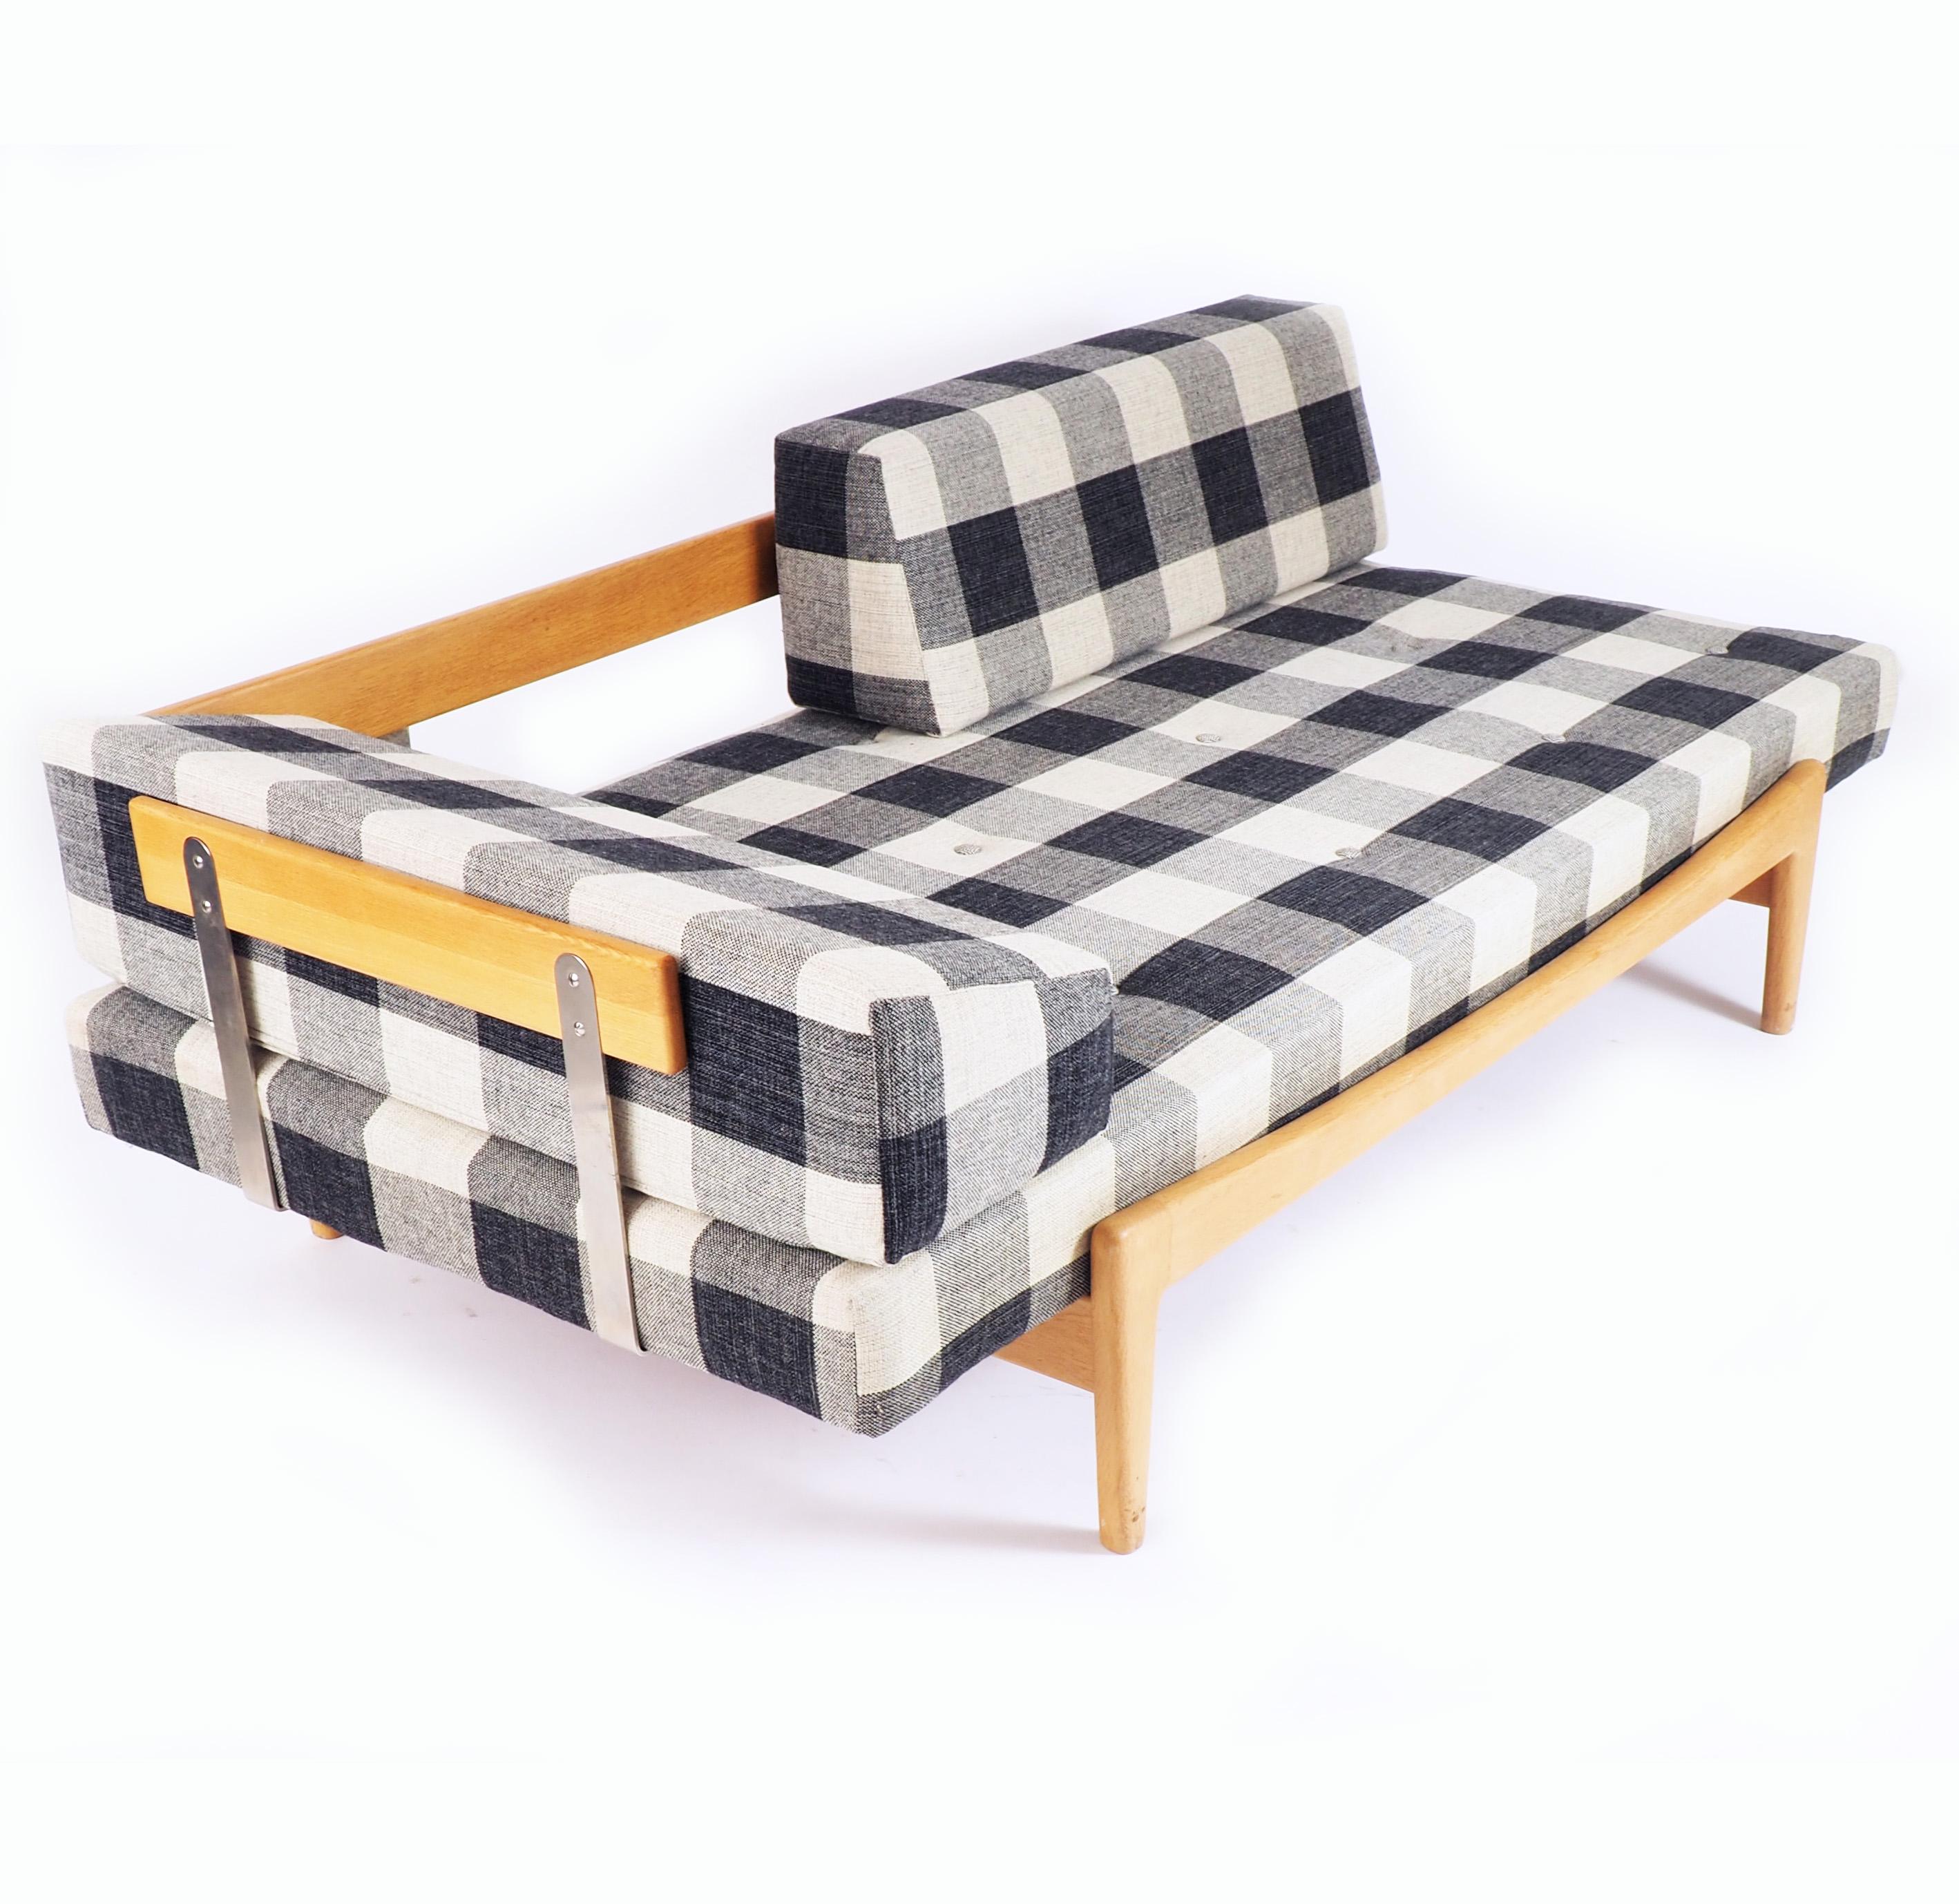 Daybed in excellent condition by Ib Kofod-Larsen for Seffle Möbelfabrik. Solid oak and original wollen fabric.